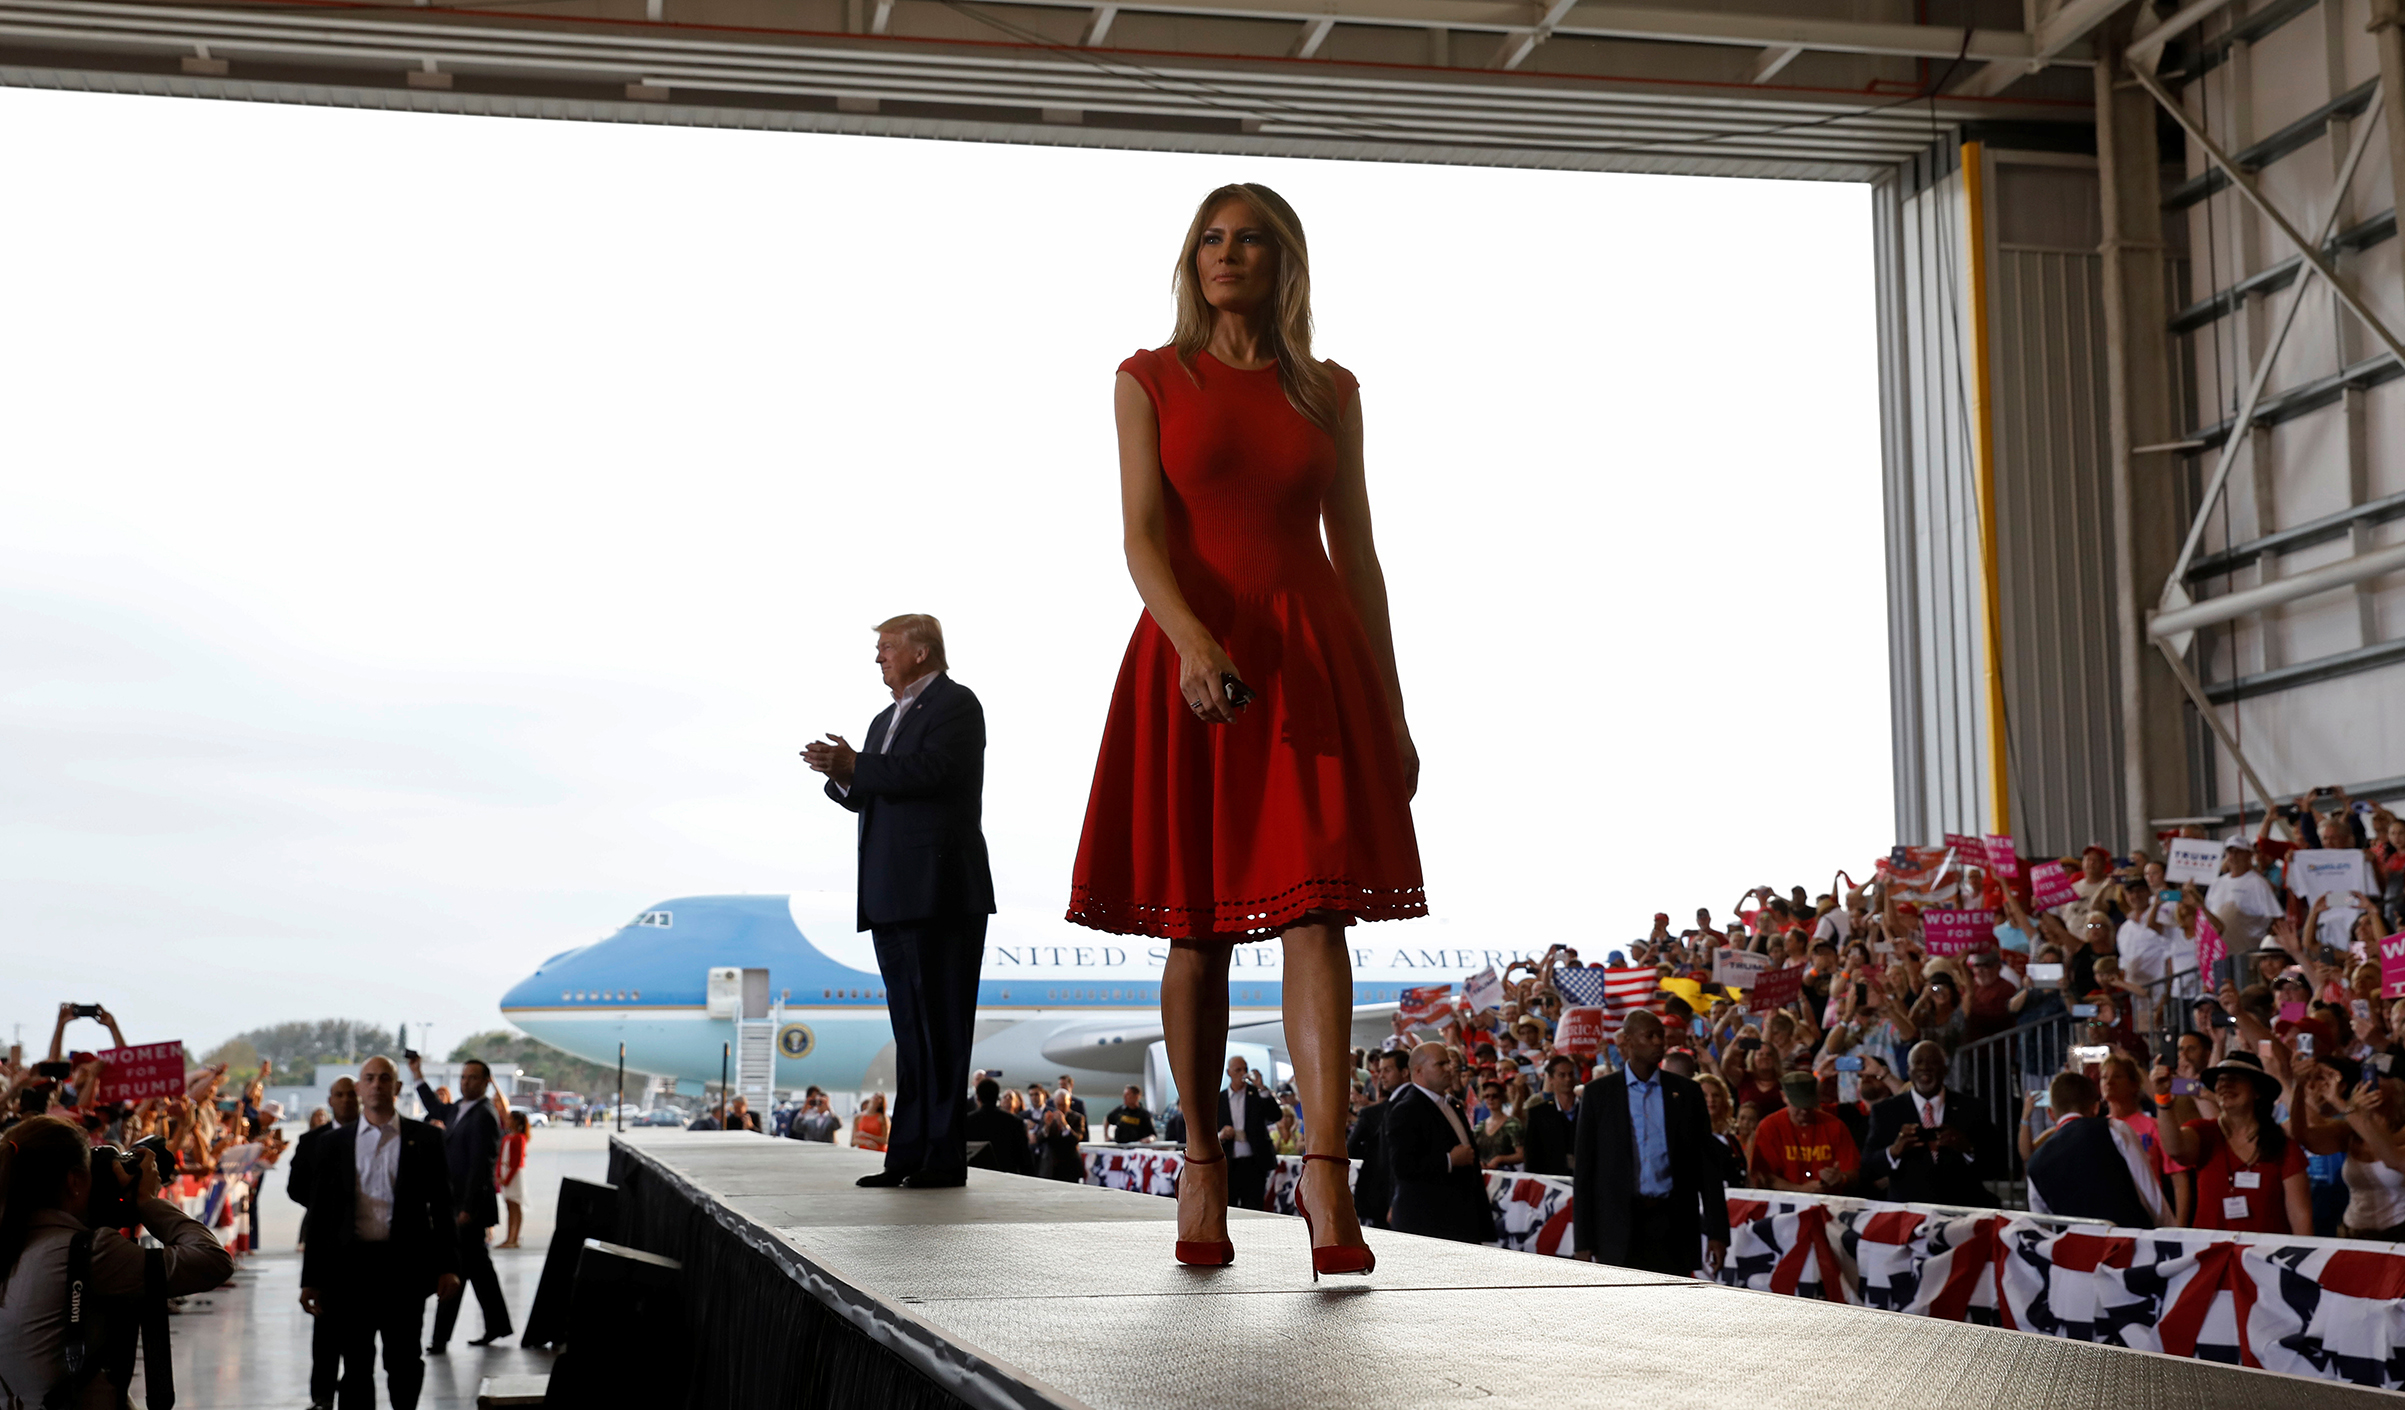 President Donald Trump and first lady Melania Trump  wearing Alexander McQueen red dress, arrive at a  Make America Great Again  rally at Orlando-Melbourne International Airport in Melbourne, Fla., U.S. Feb.18, 2017.